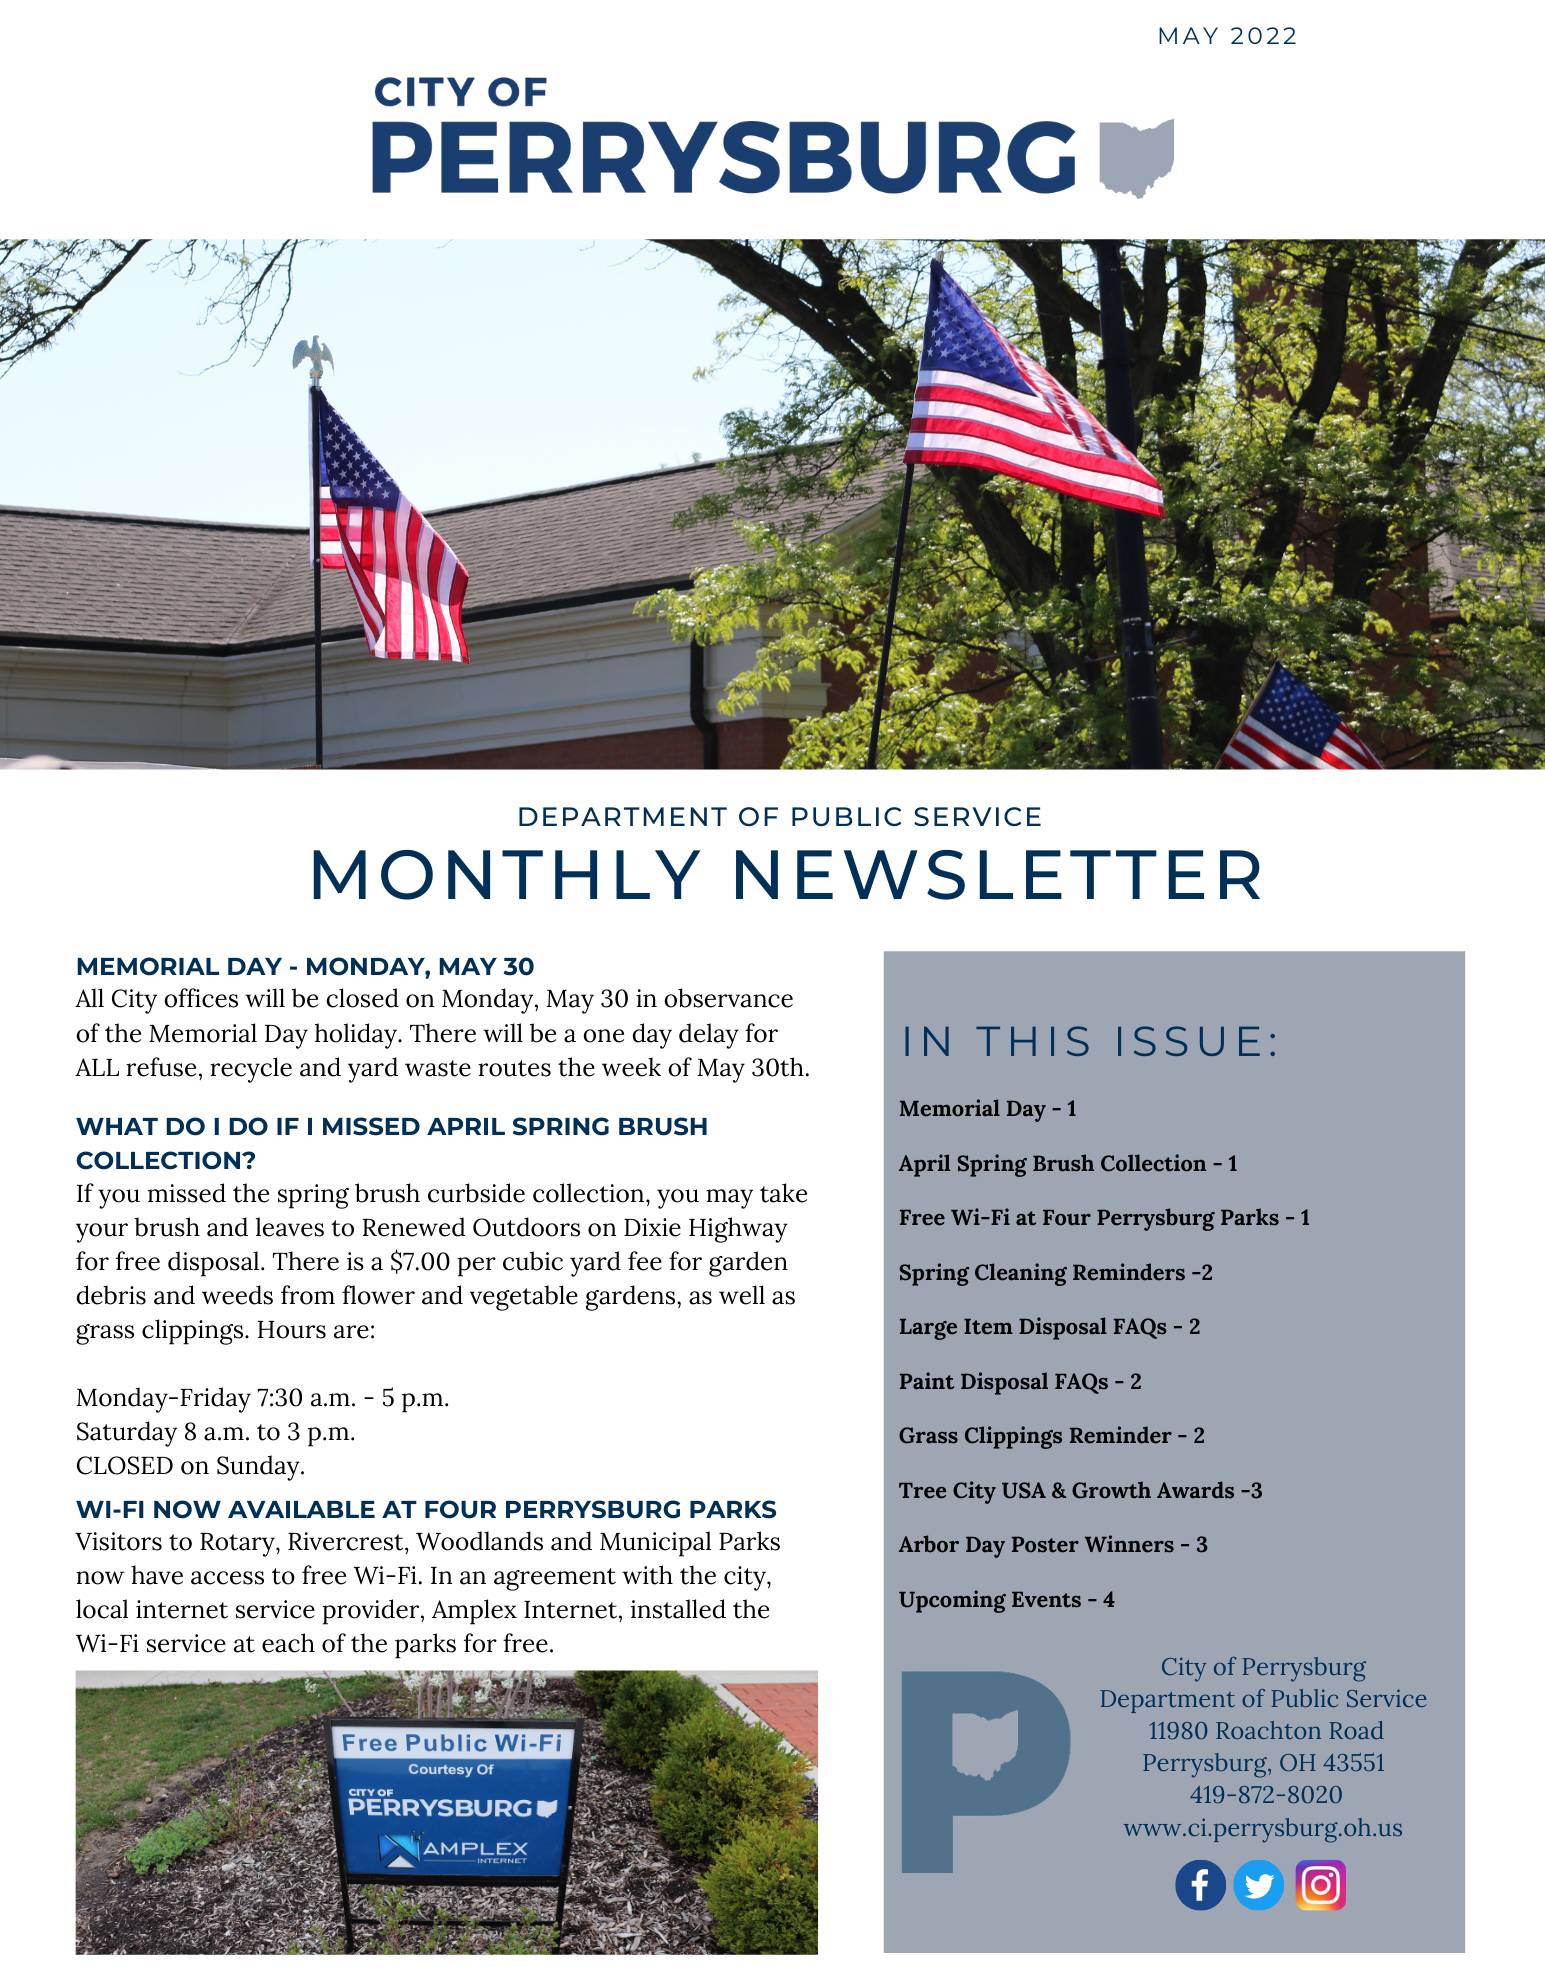 May 2022 DPS Newsletter - Copy